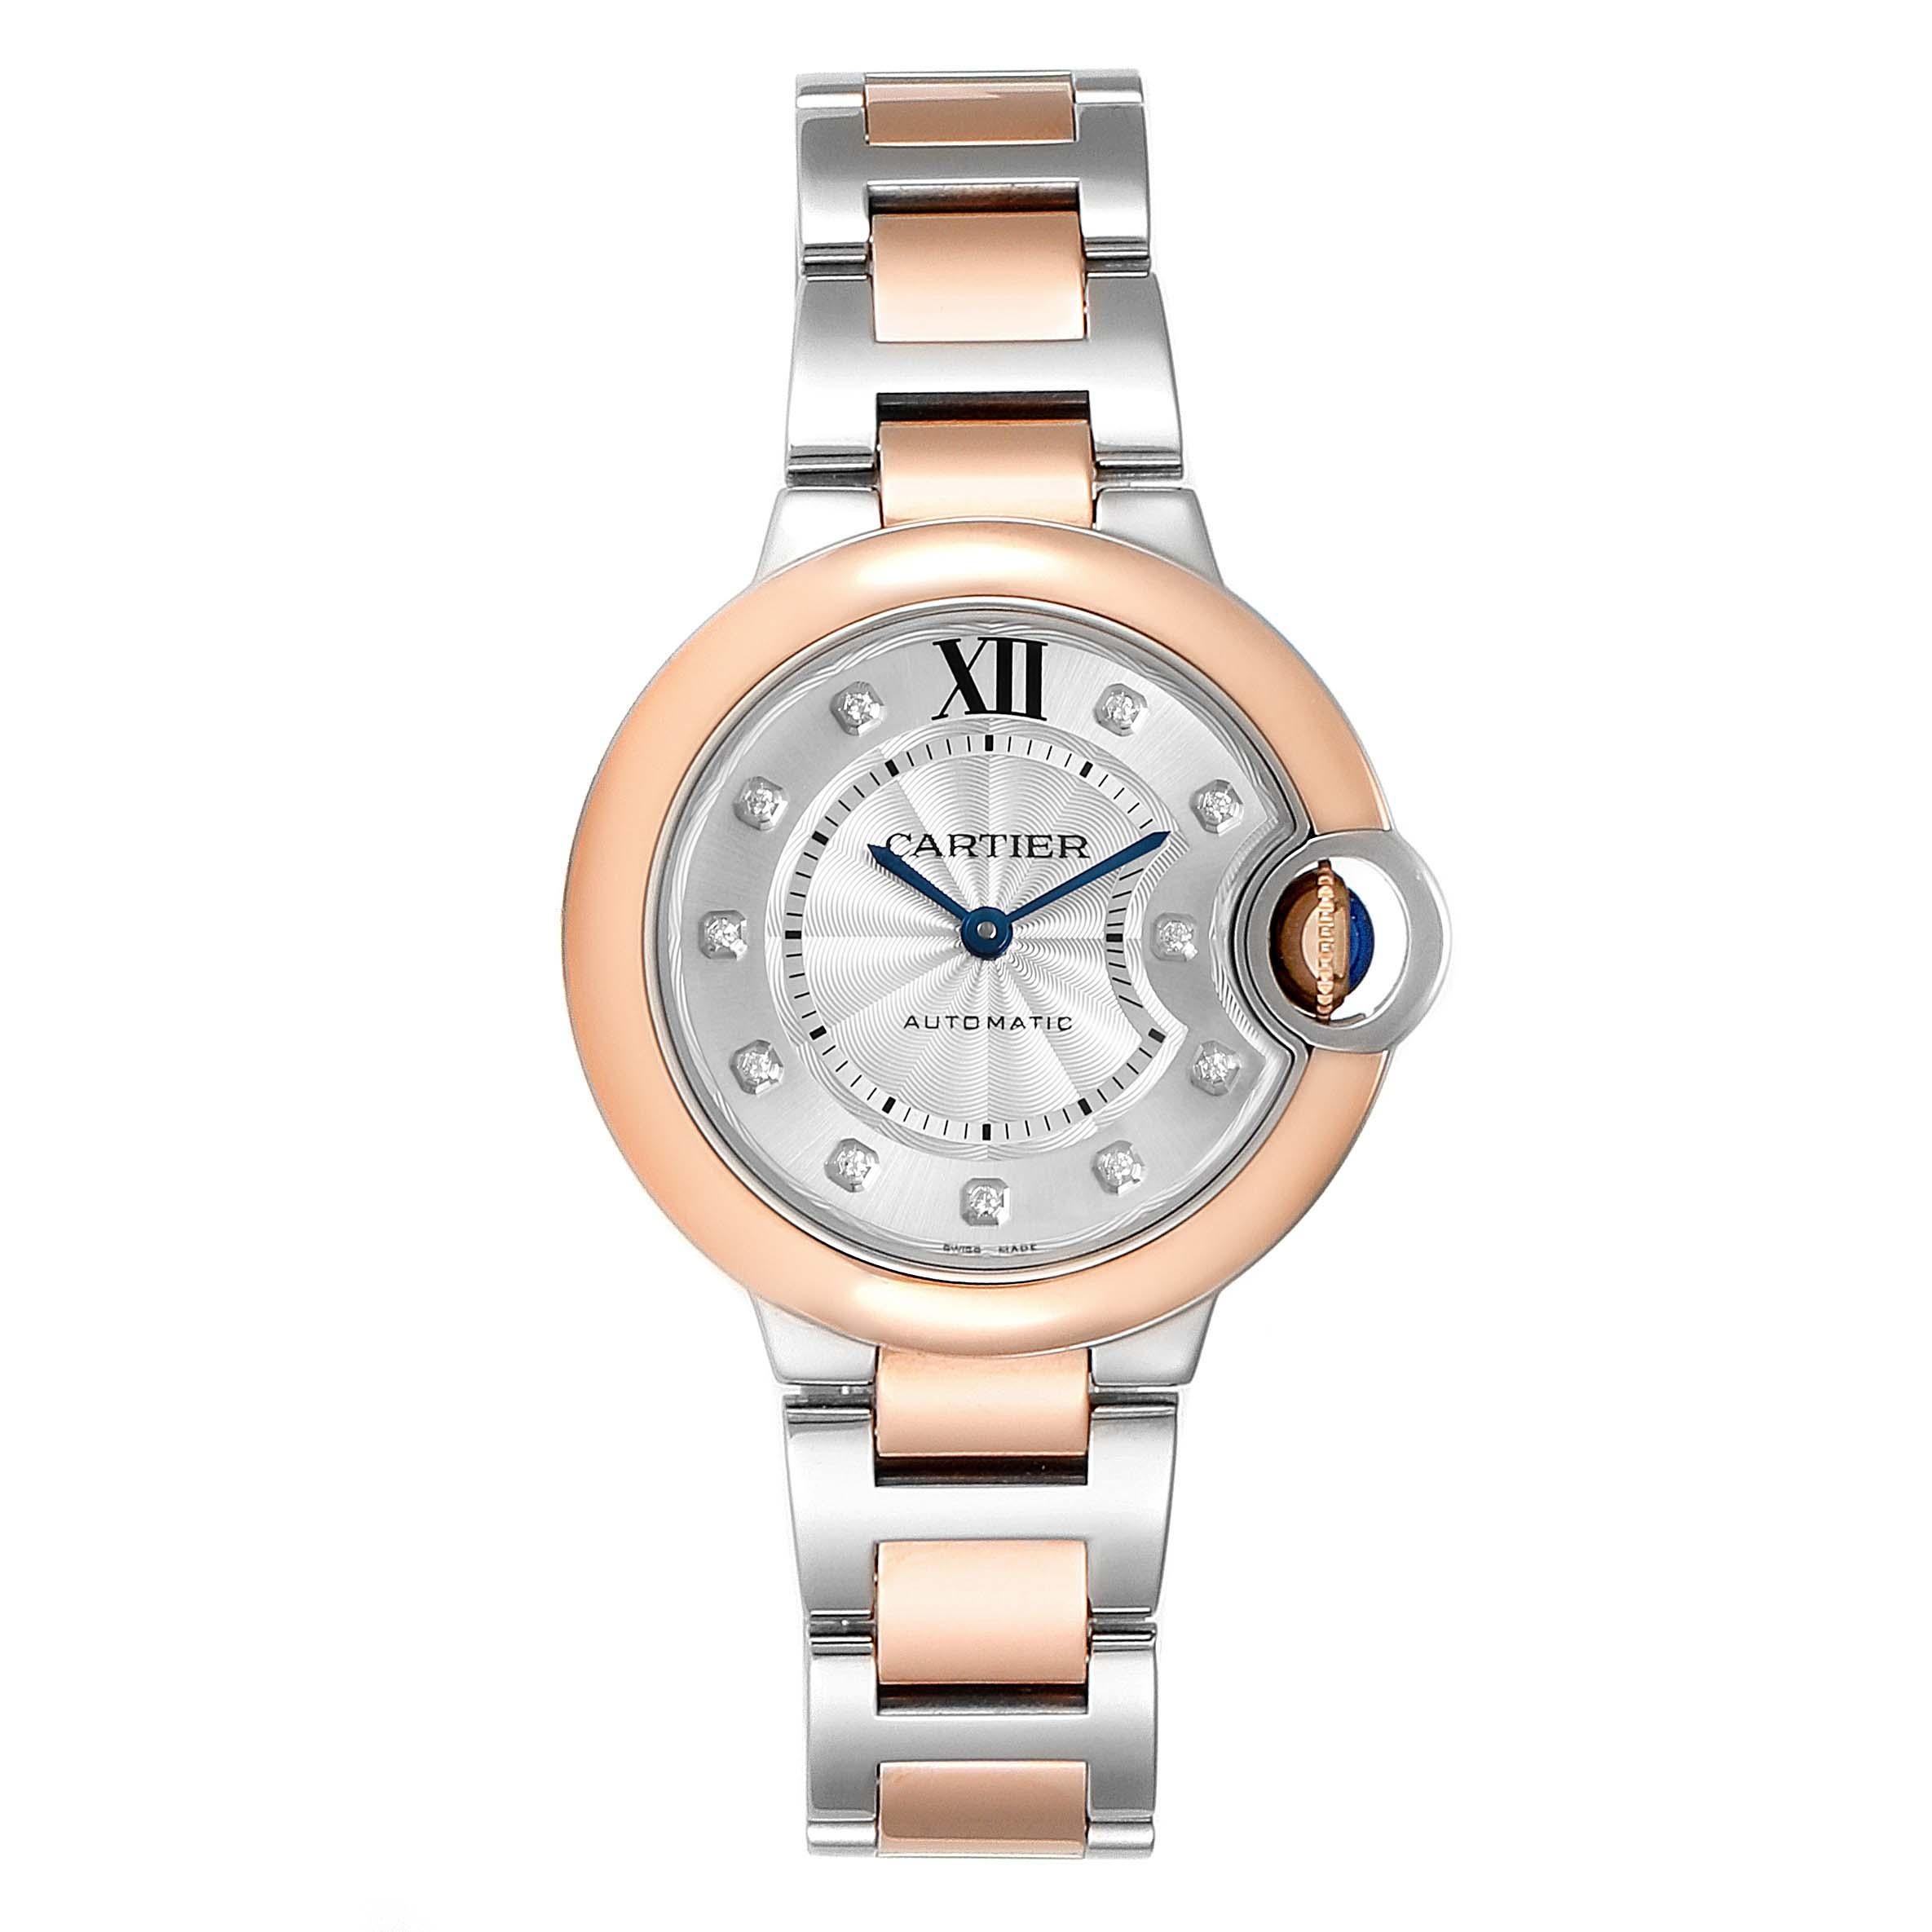 Cartier Ballon Bleu 33 Steel Rose Gold Diamond Ladies Watch WE902061. Automatic self-winding movement. Caliber 076. Round stainless steel and 18K rose gold case 33 mm in diameter. Fluted crown set with the blue spinel cabochon. 18K rose gold smooth